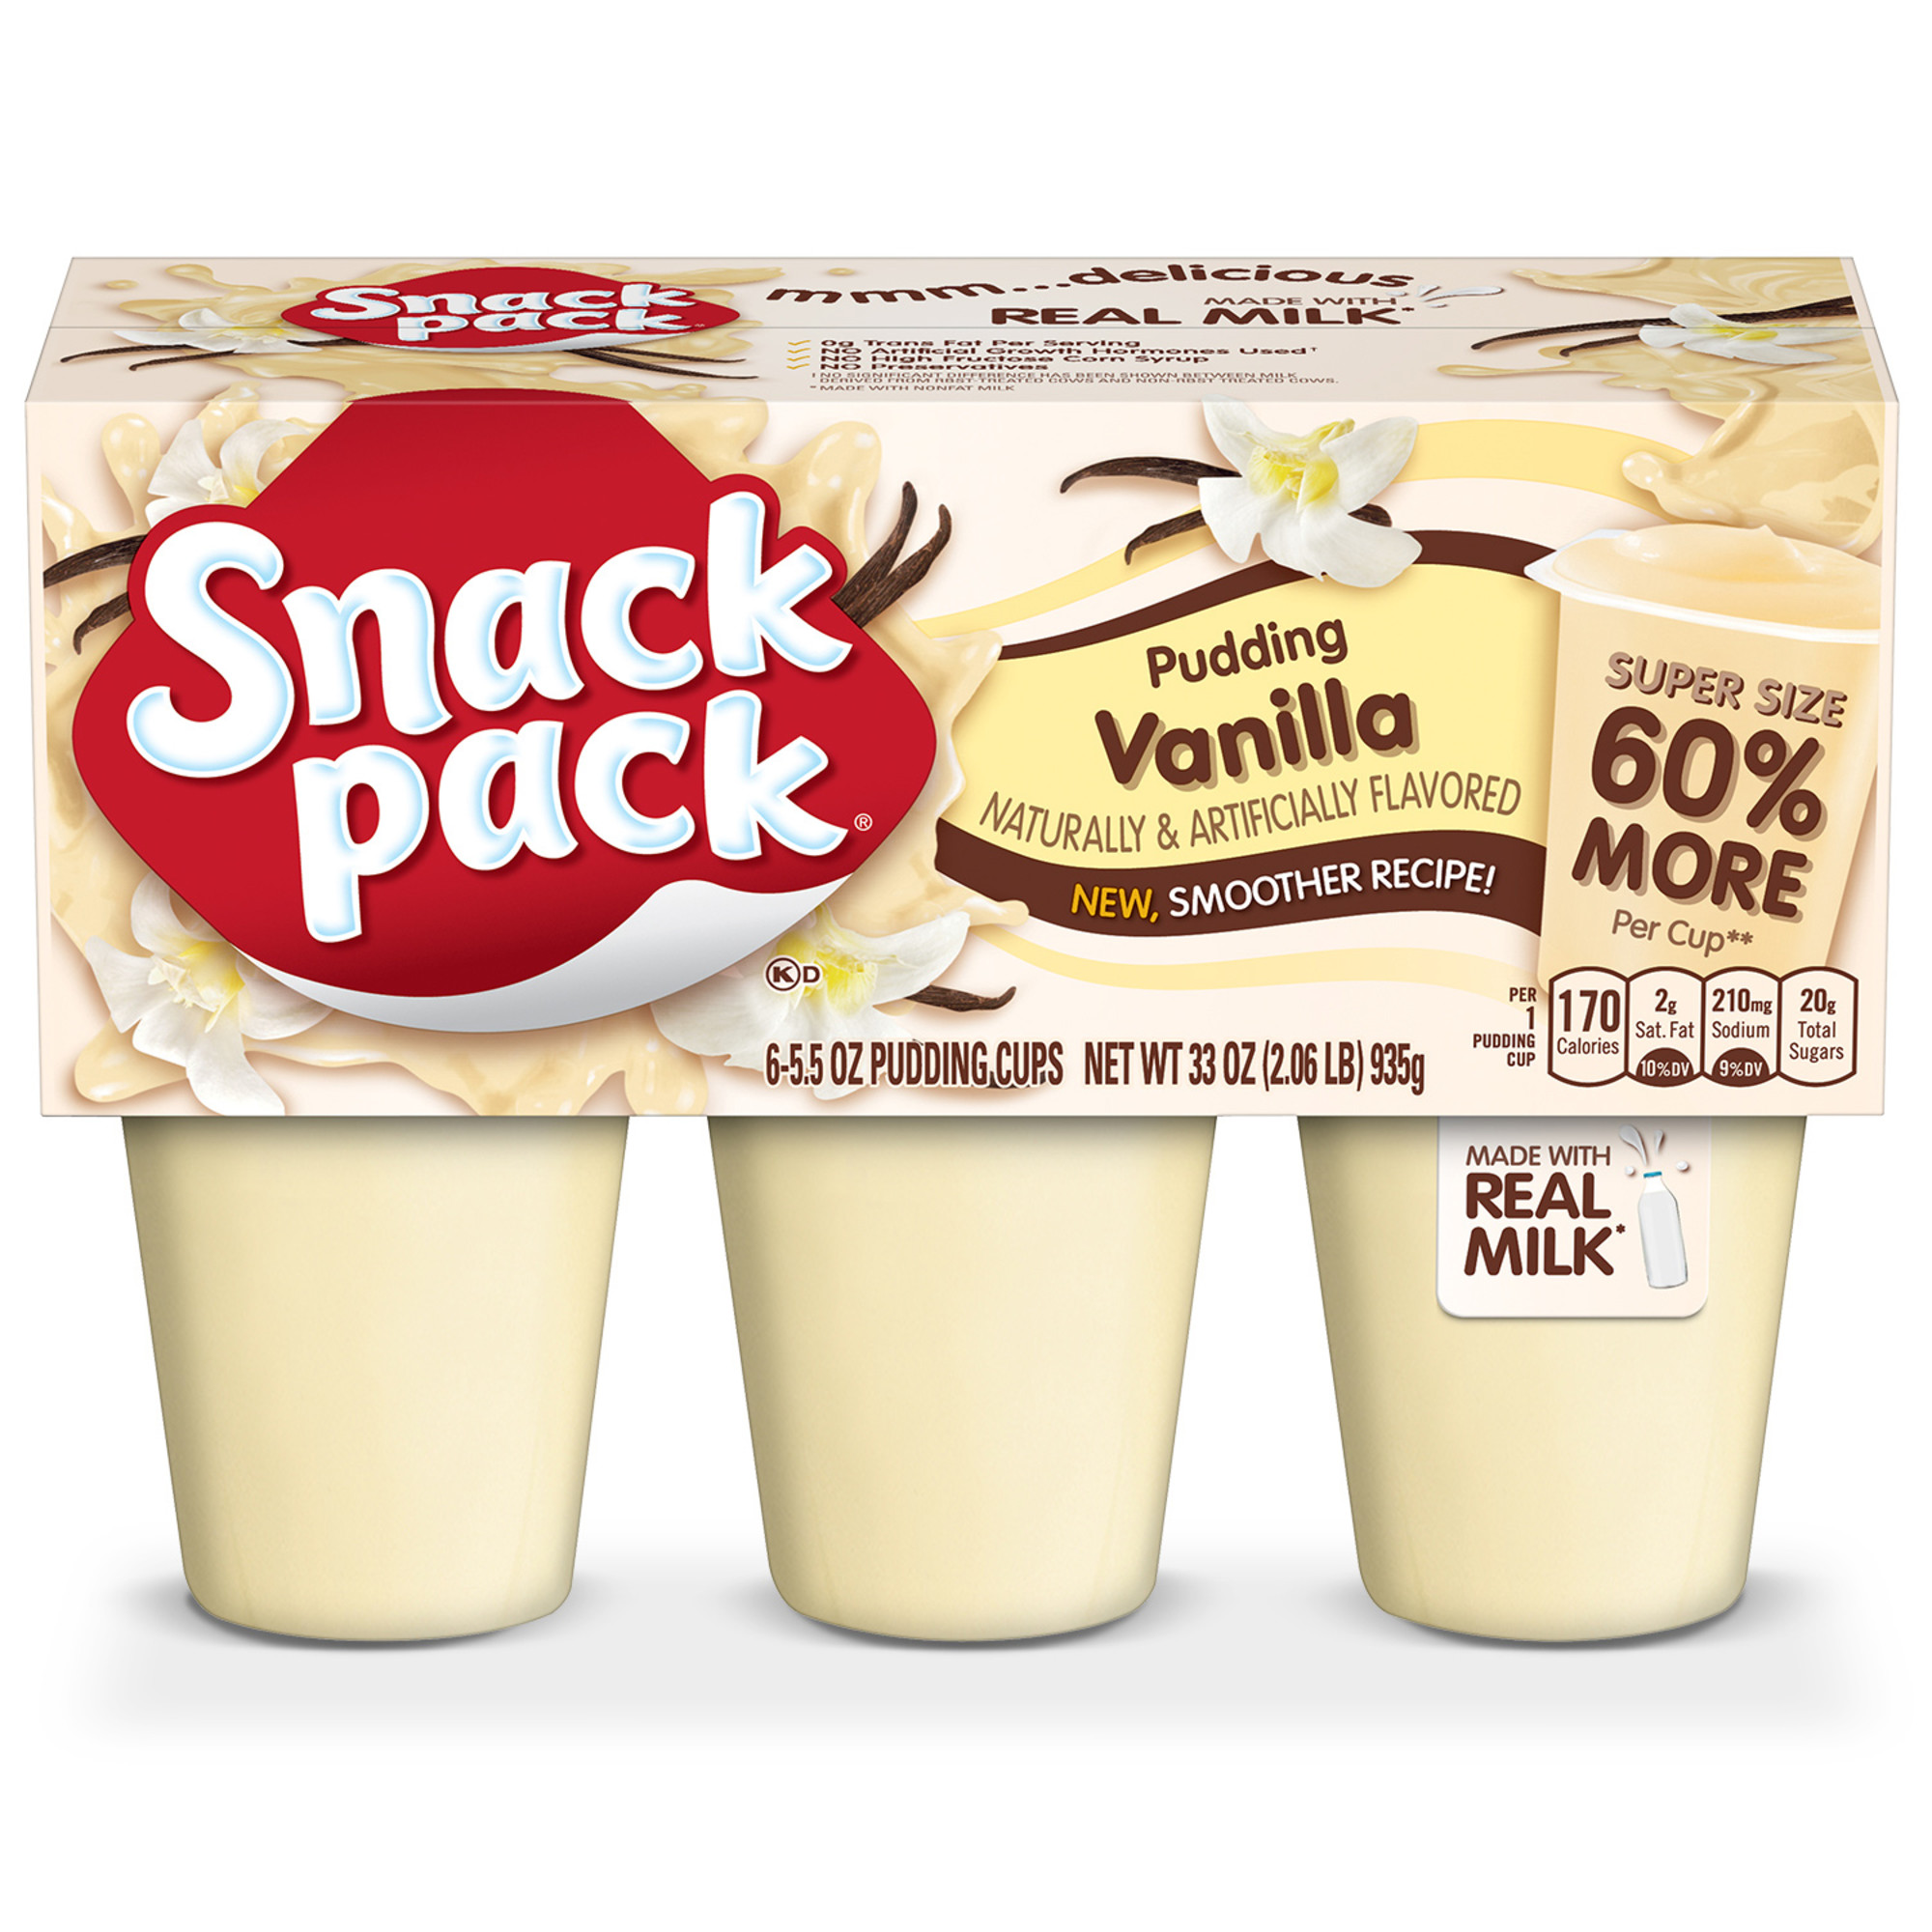 Snack Pack Vanilla Flavored Pudding, 6 Count Pudding Cups - image 1 of 9